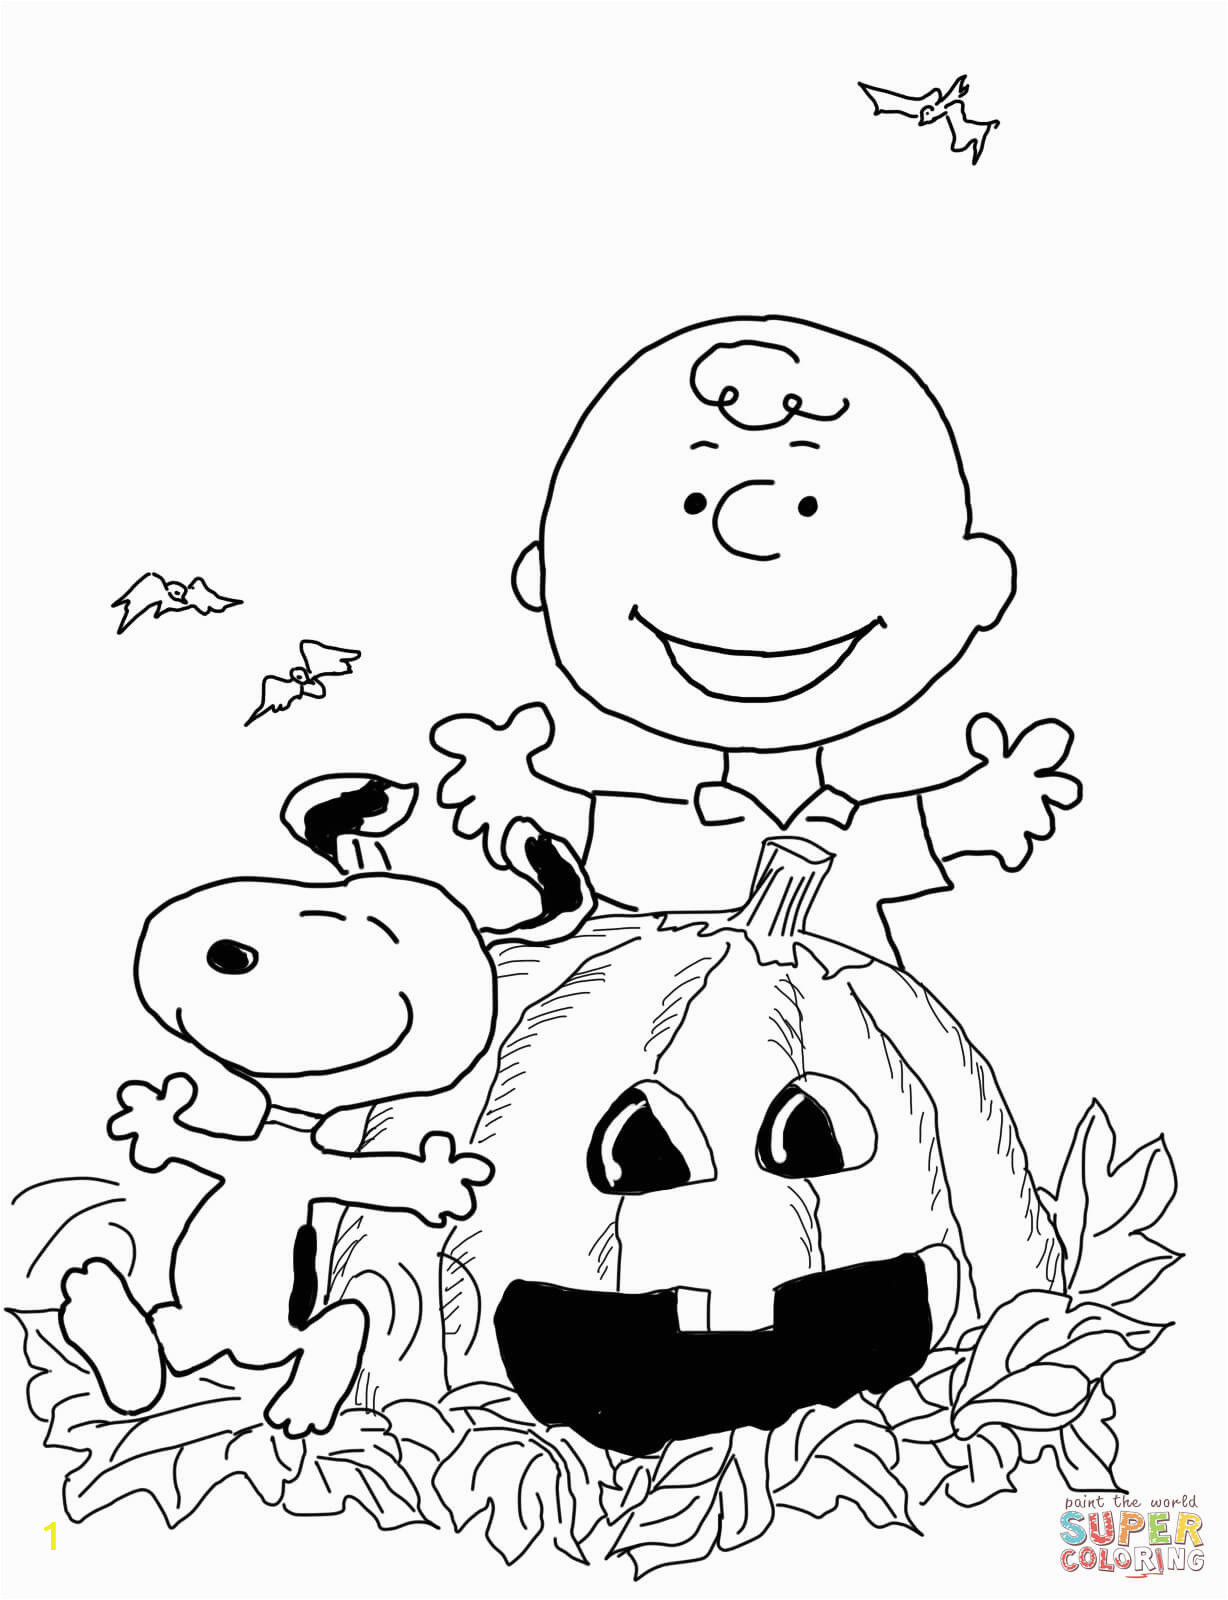 Great Pumpkin Charlie Brown Coloring Pages Free Its the Great Pumpkin Charlie Brown Coloring Pages